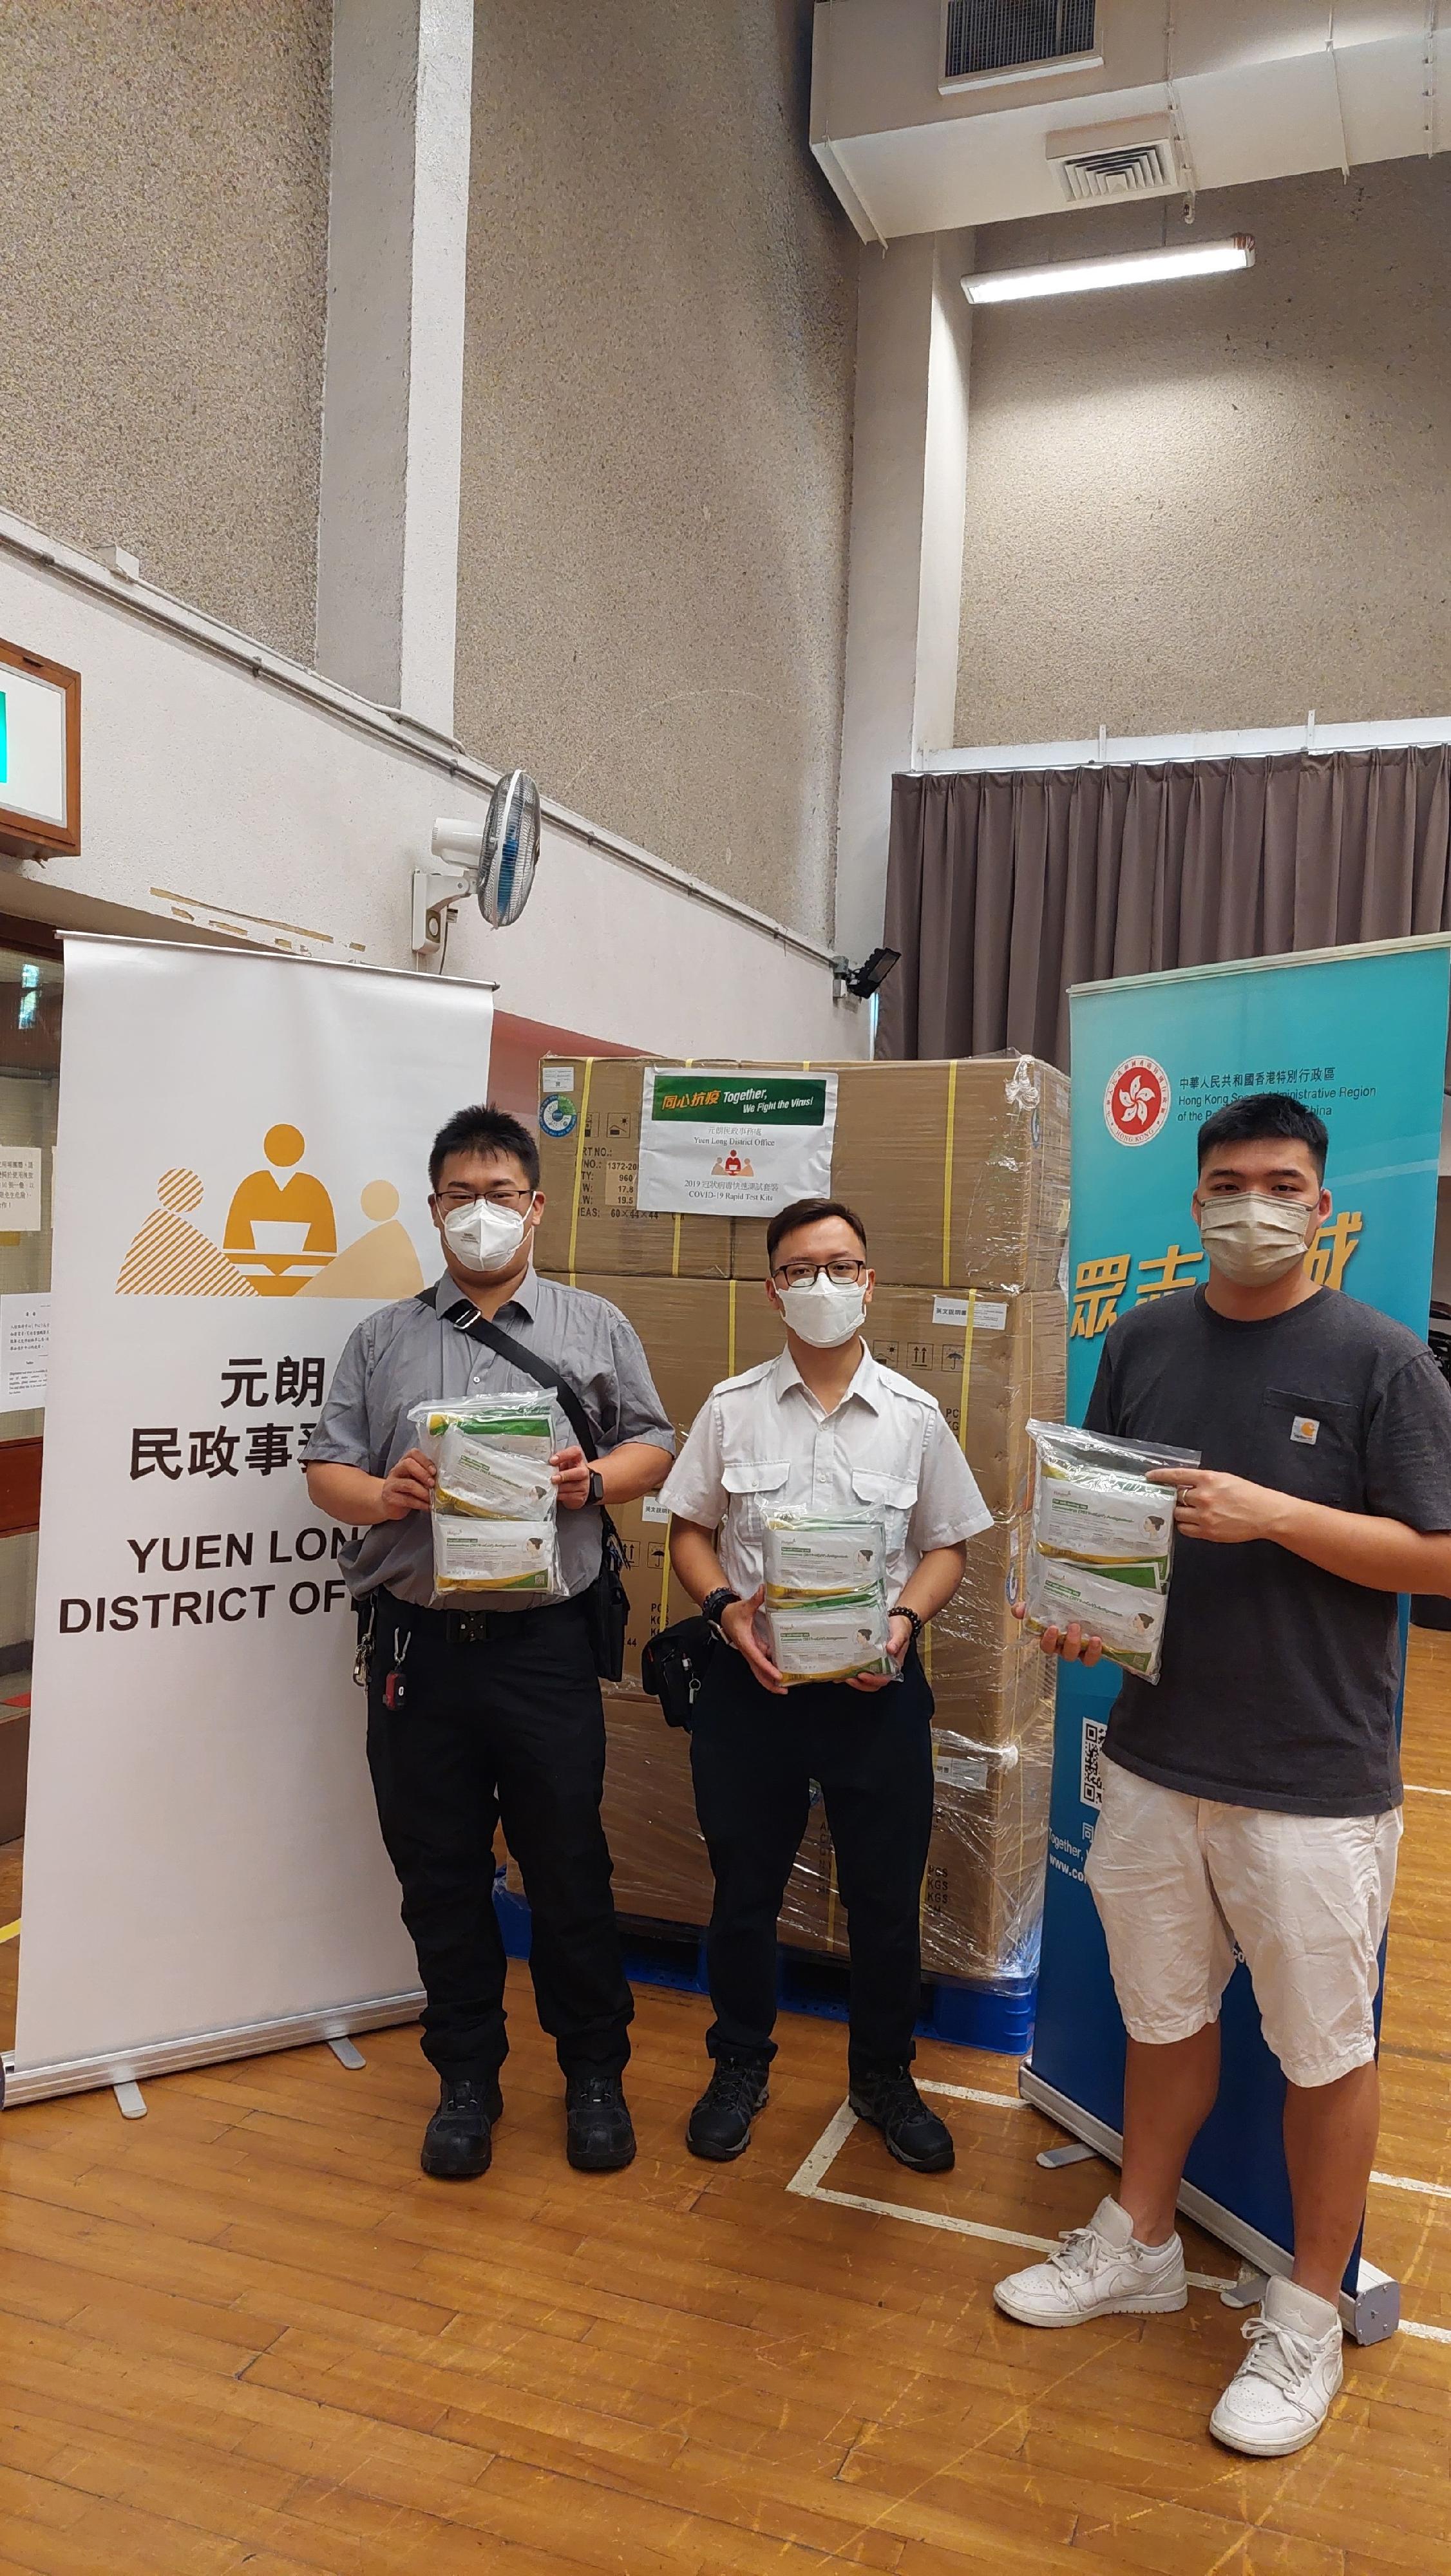 The Yuen Long District Office today (May 20) distributed COVID-19 rapid test kits to households, cleansing workers and property management staff living and working in Parkview Garden for voluntary testing through the property management company.